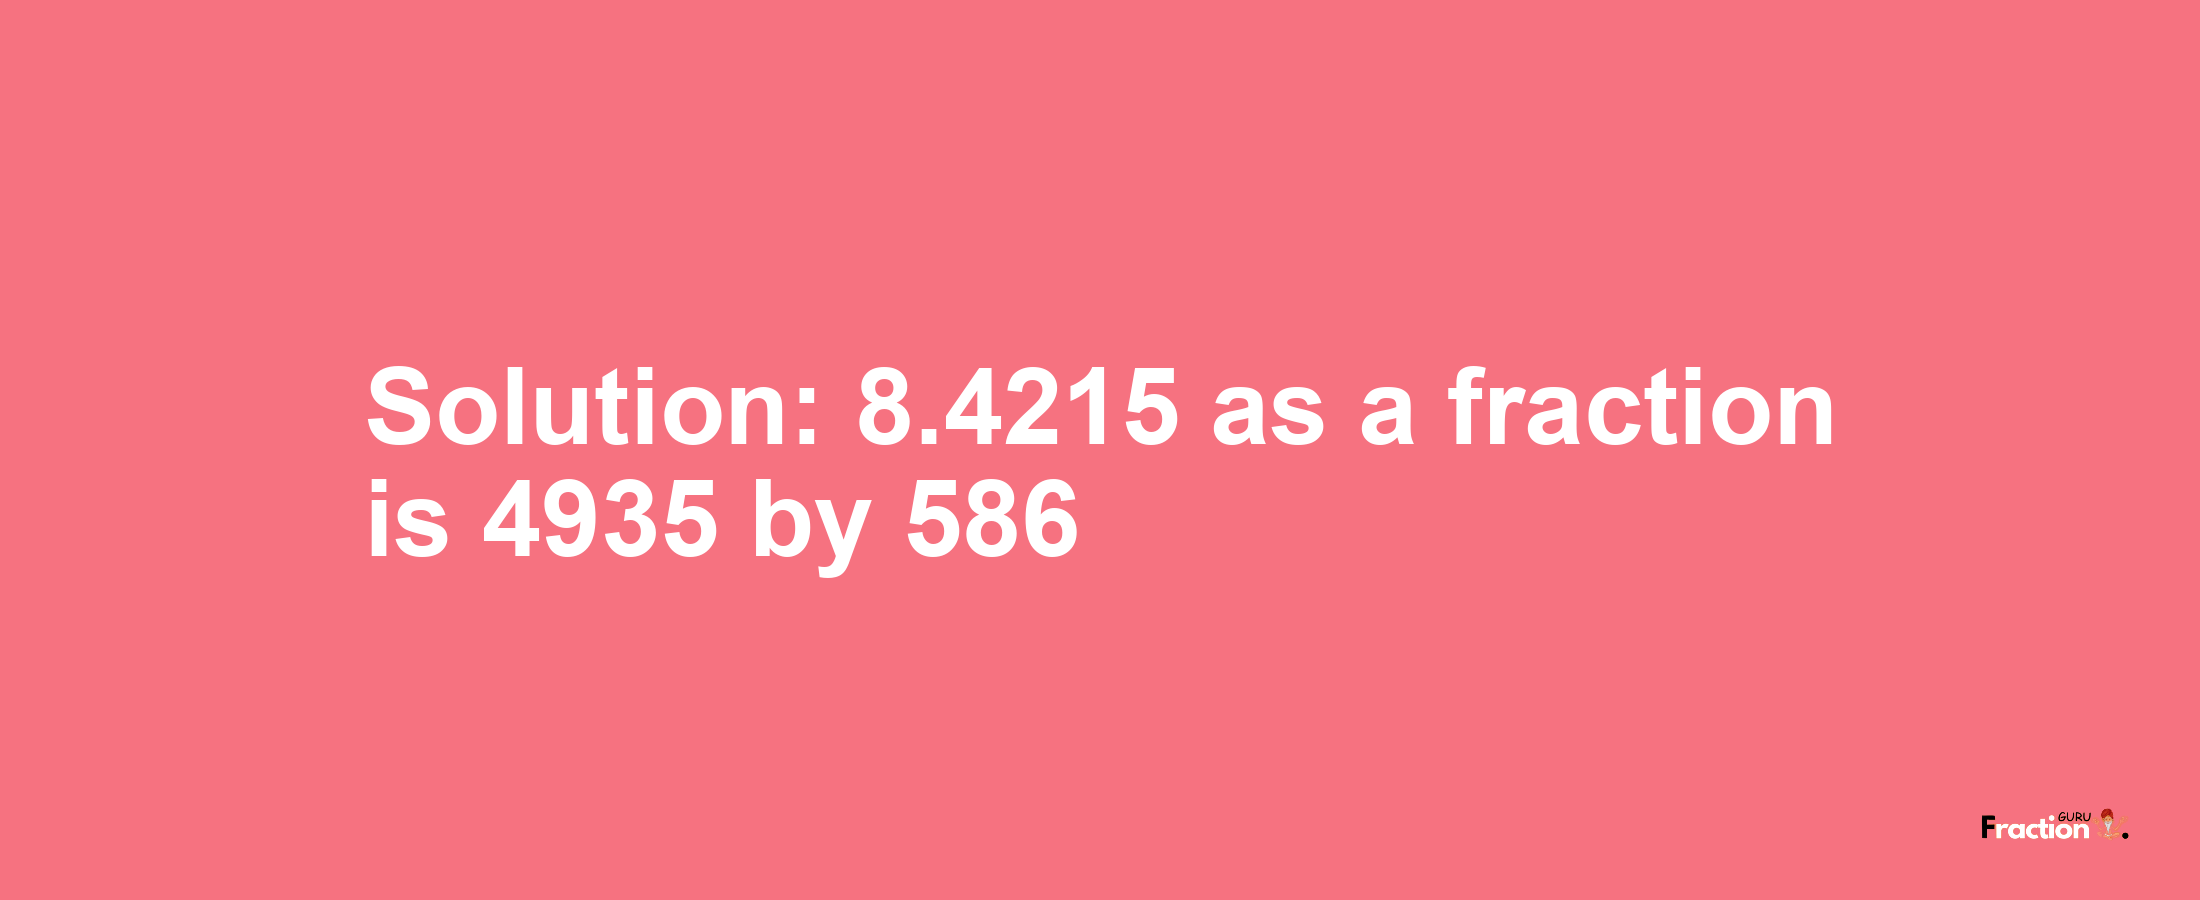 Solution:8.4215 as a fraction is 4935/586